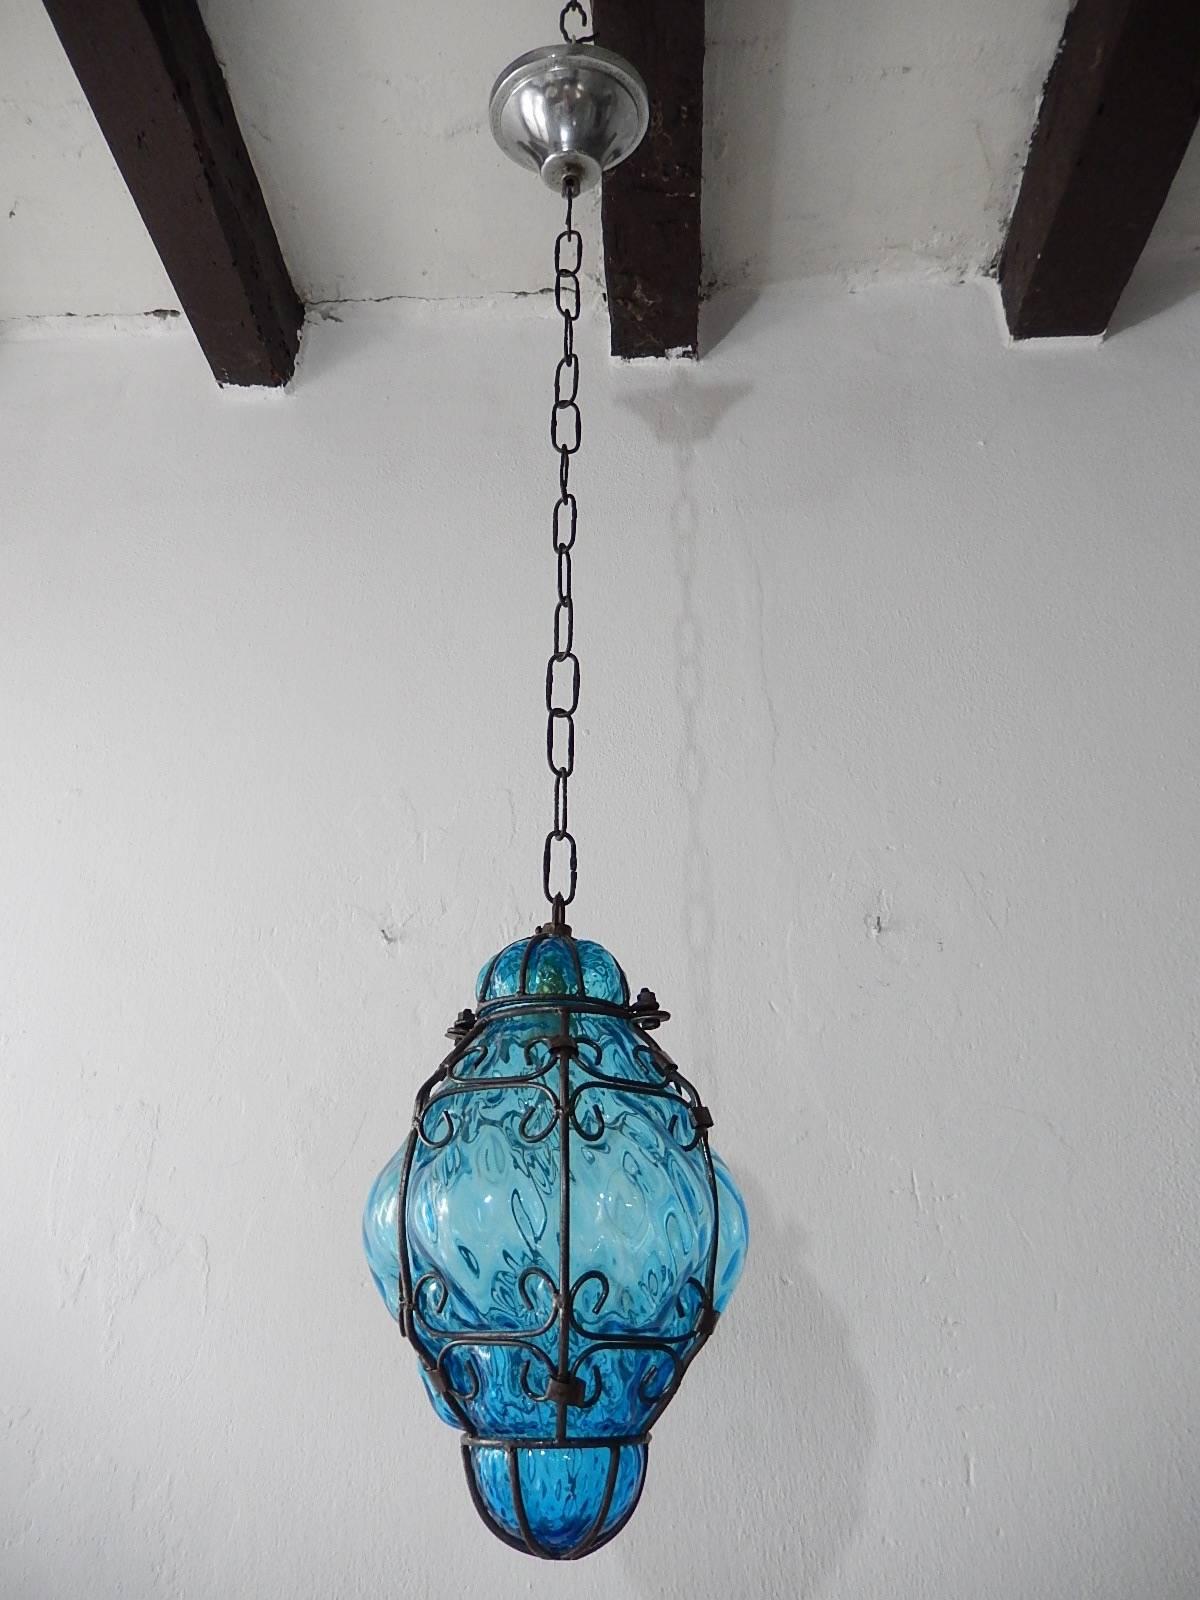 Housing one light. Rare aqua Murano blown glass. Great craftsmanship. Re-wired and ready to hang. Free priority shipping from Italy. Adding another 23 inches of original chain and canopy.